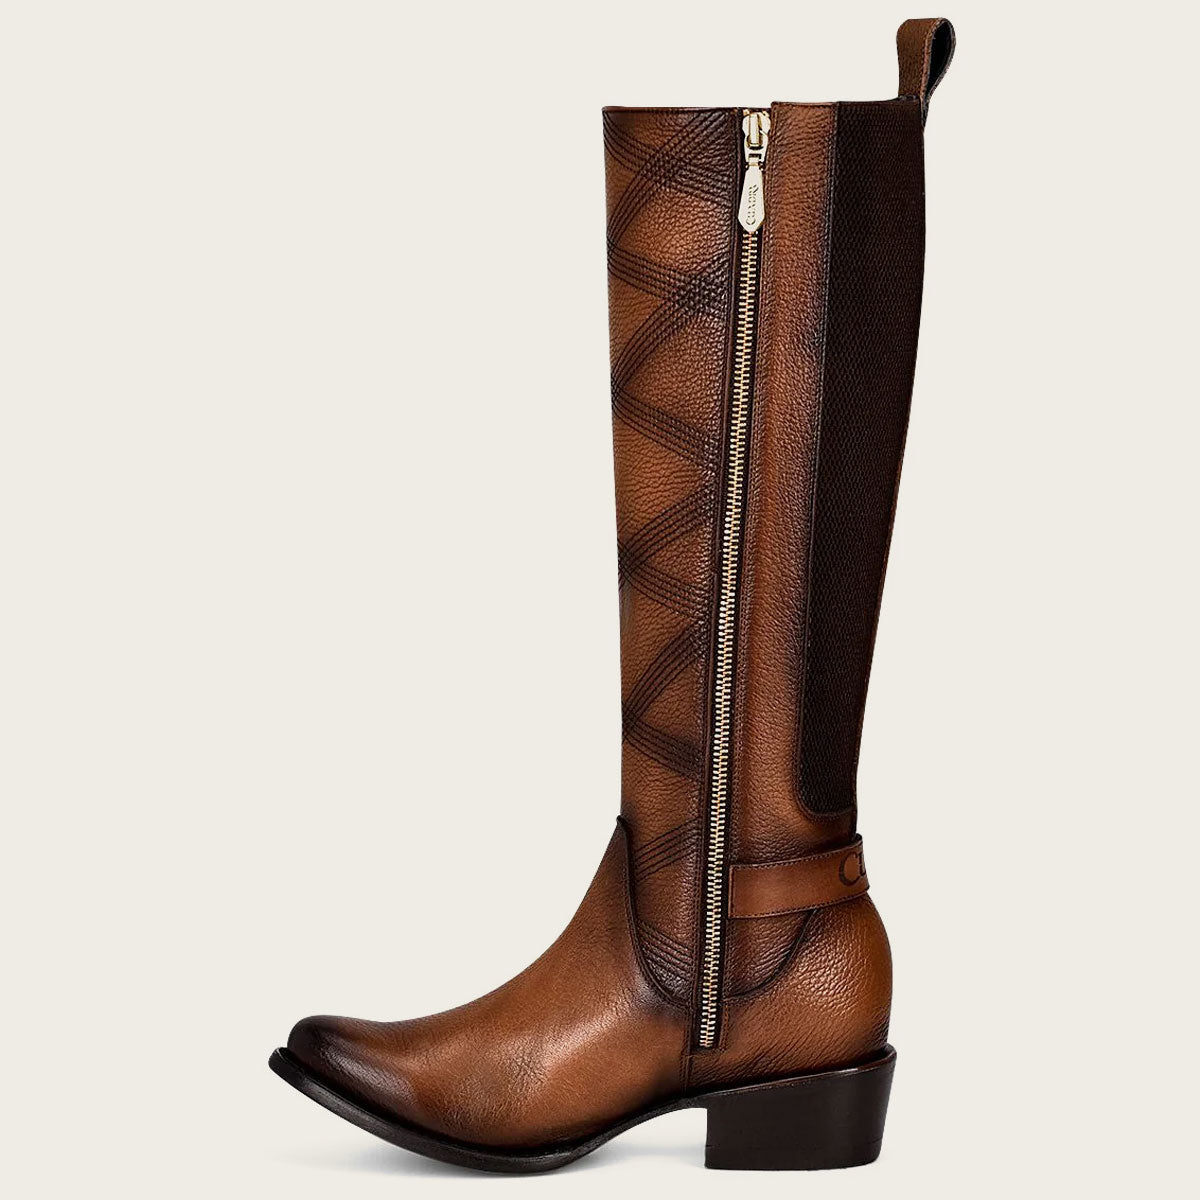 A beautiful honey-colored leather boot with intricate embroidery, perfect for adding a touch of elegance to any outfit.